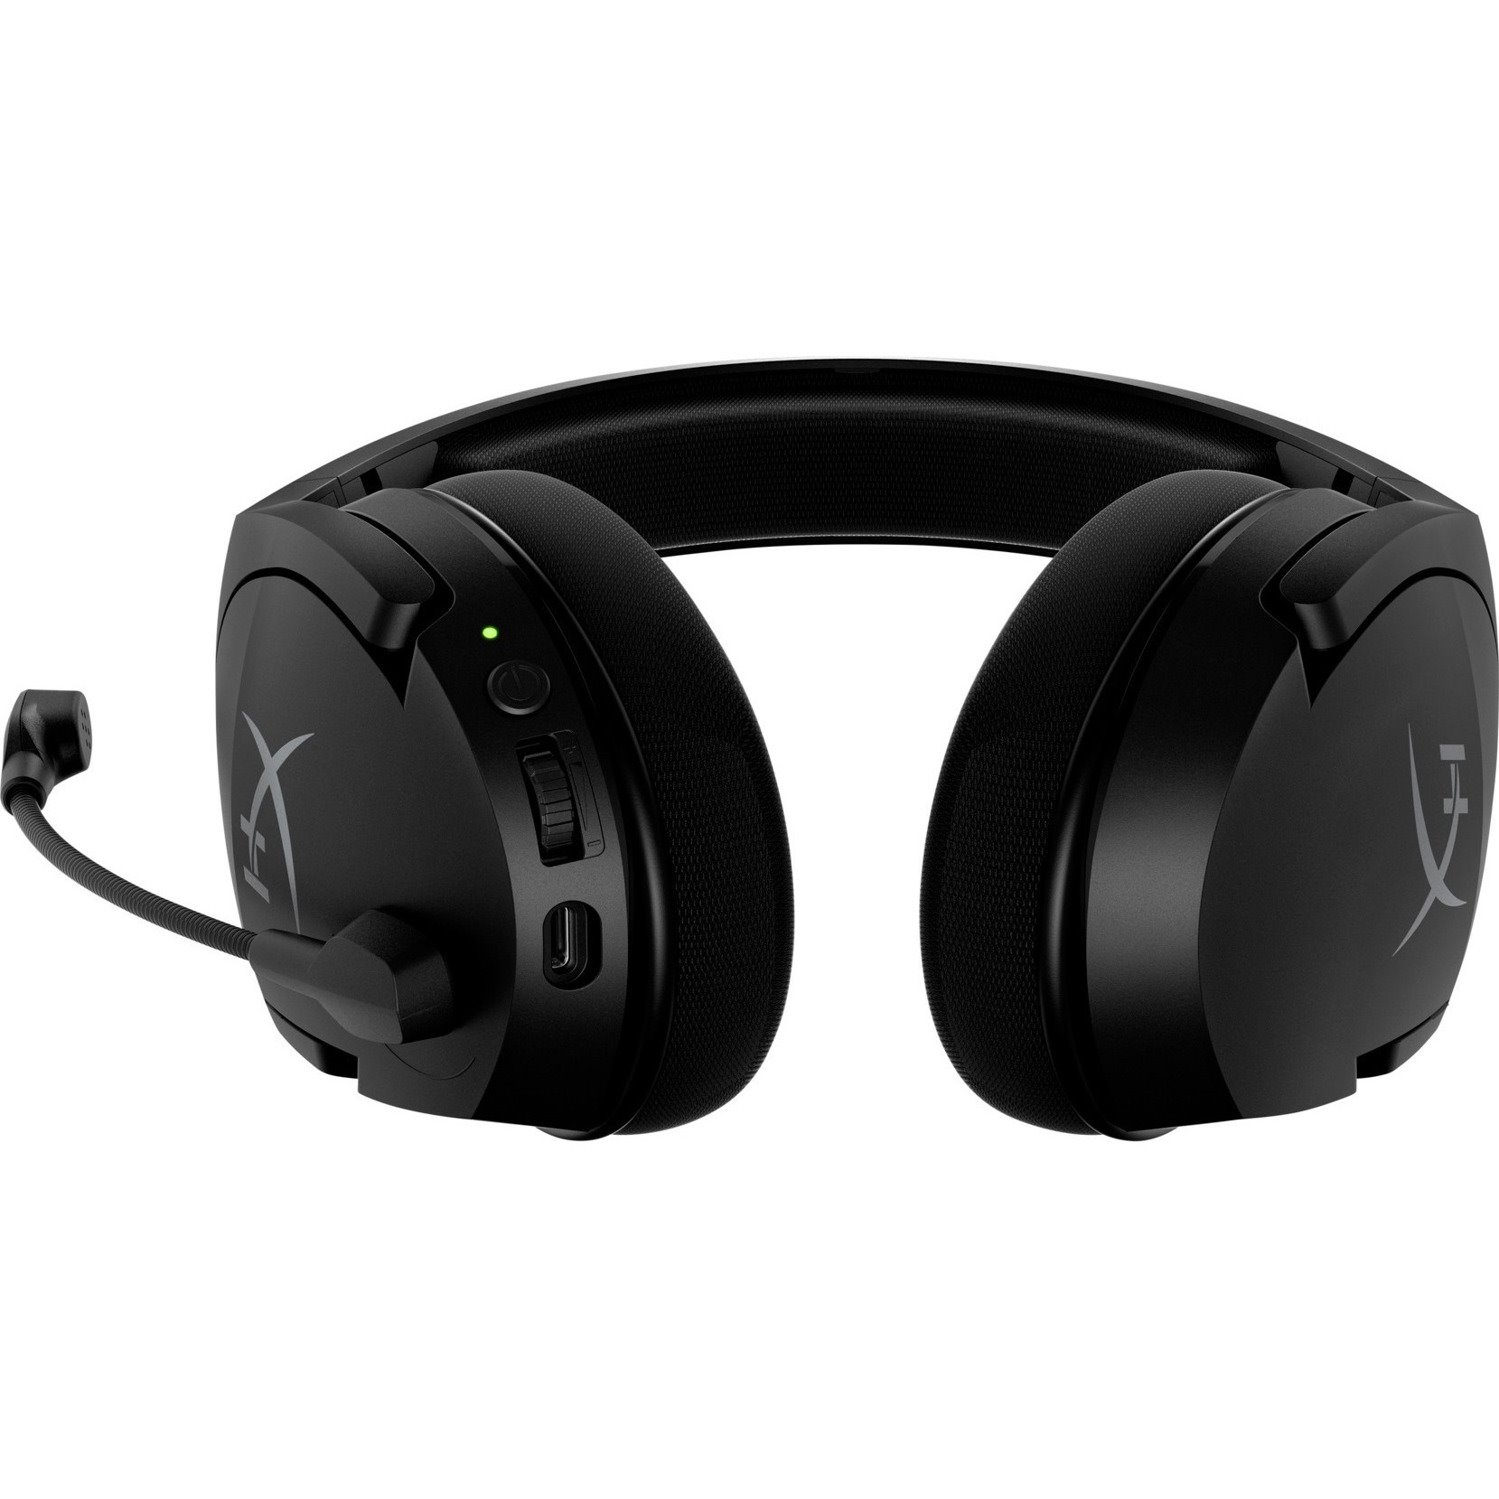 HPI SOURCING - NEW Cloud Stinger Core Gaming Headset